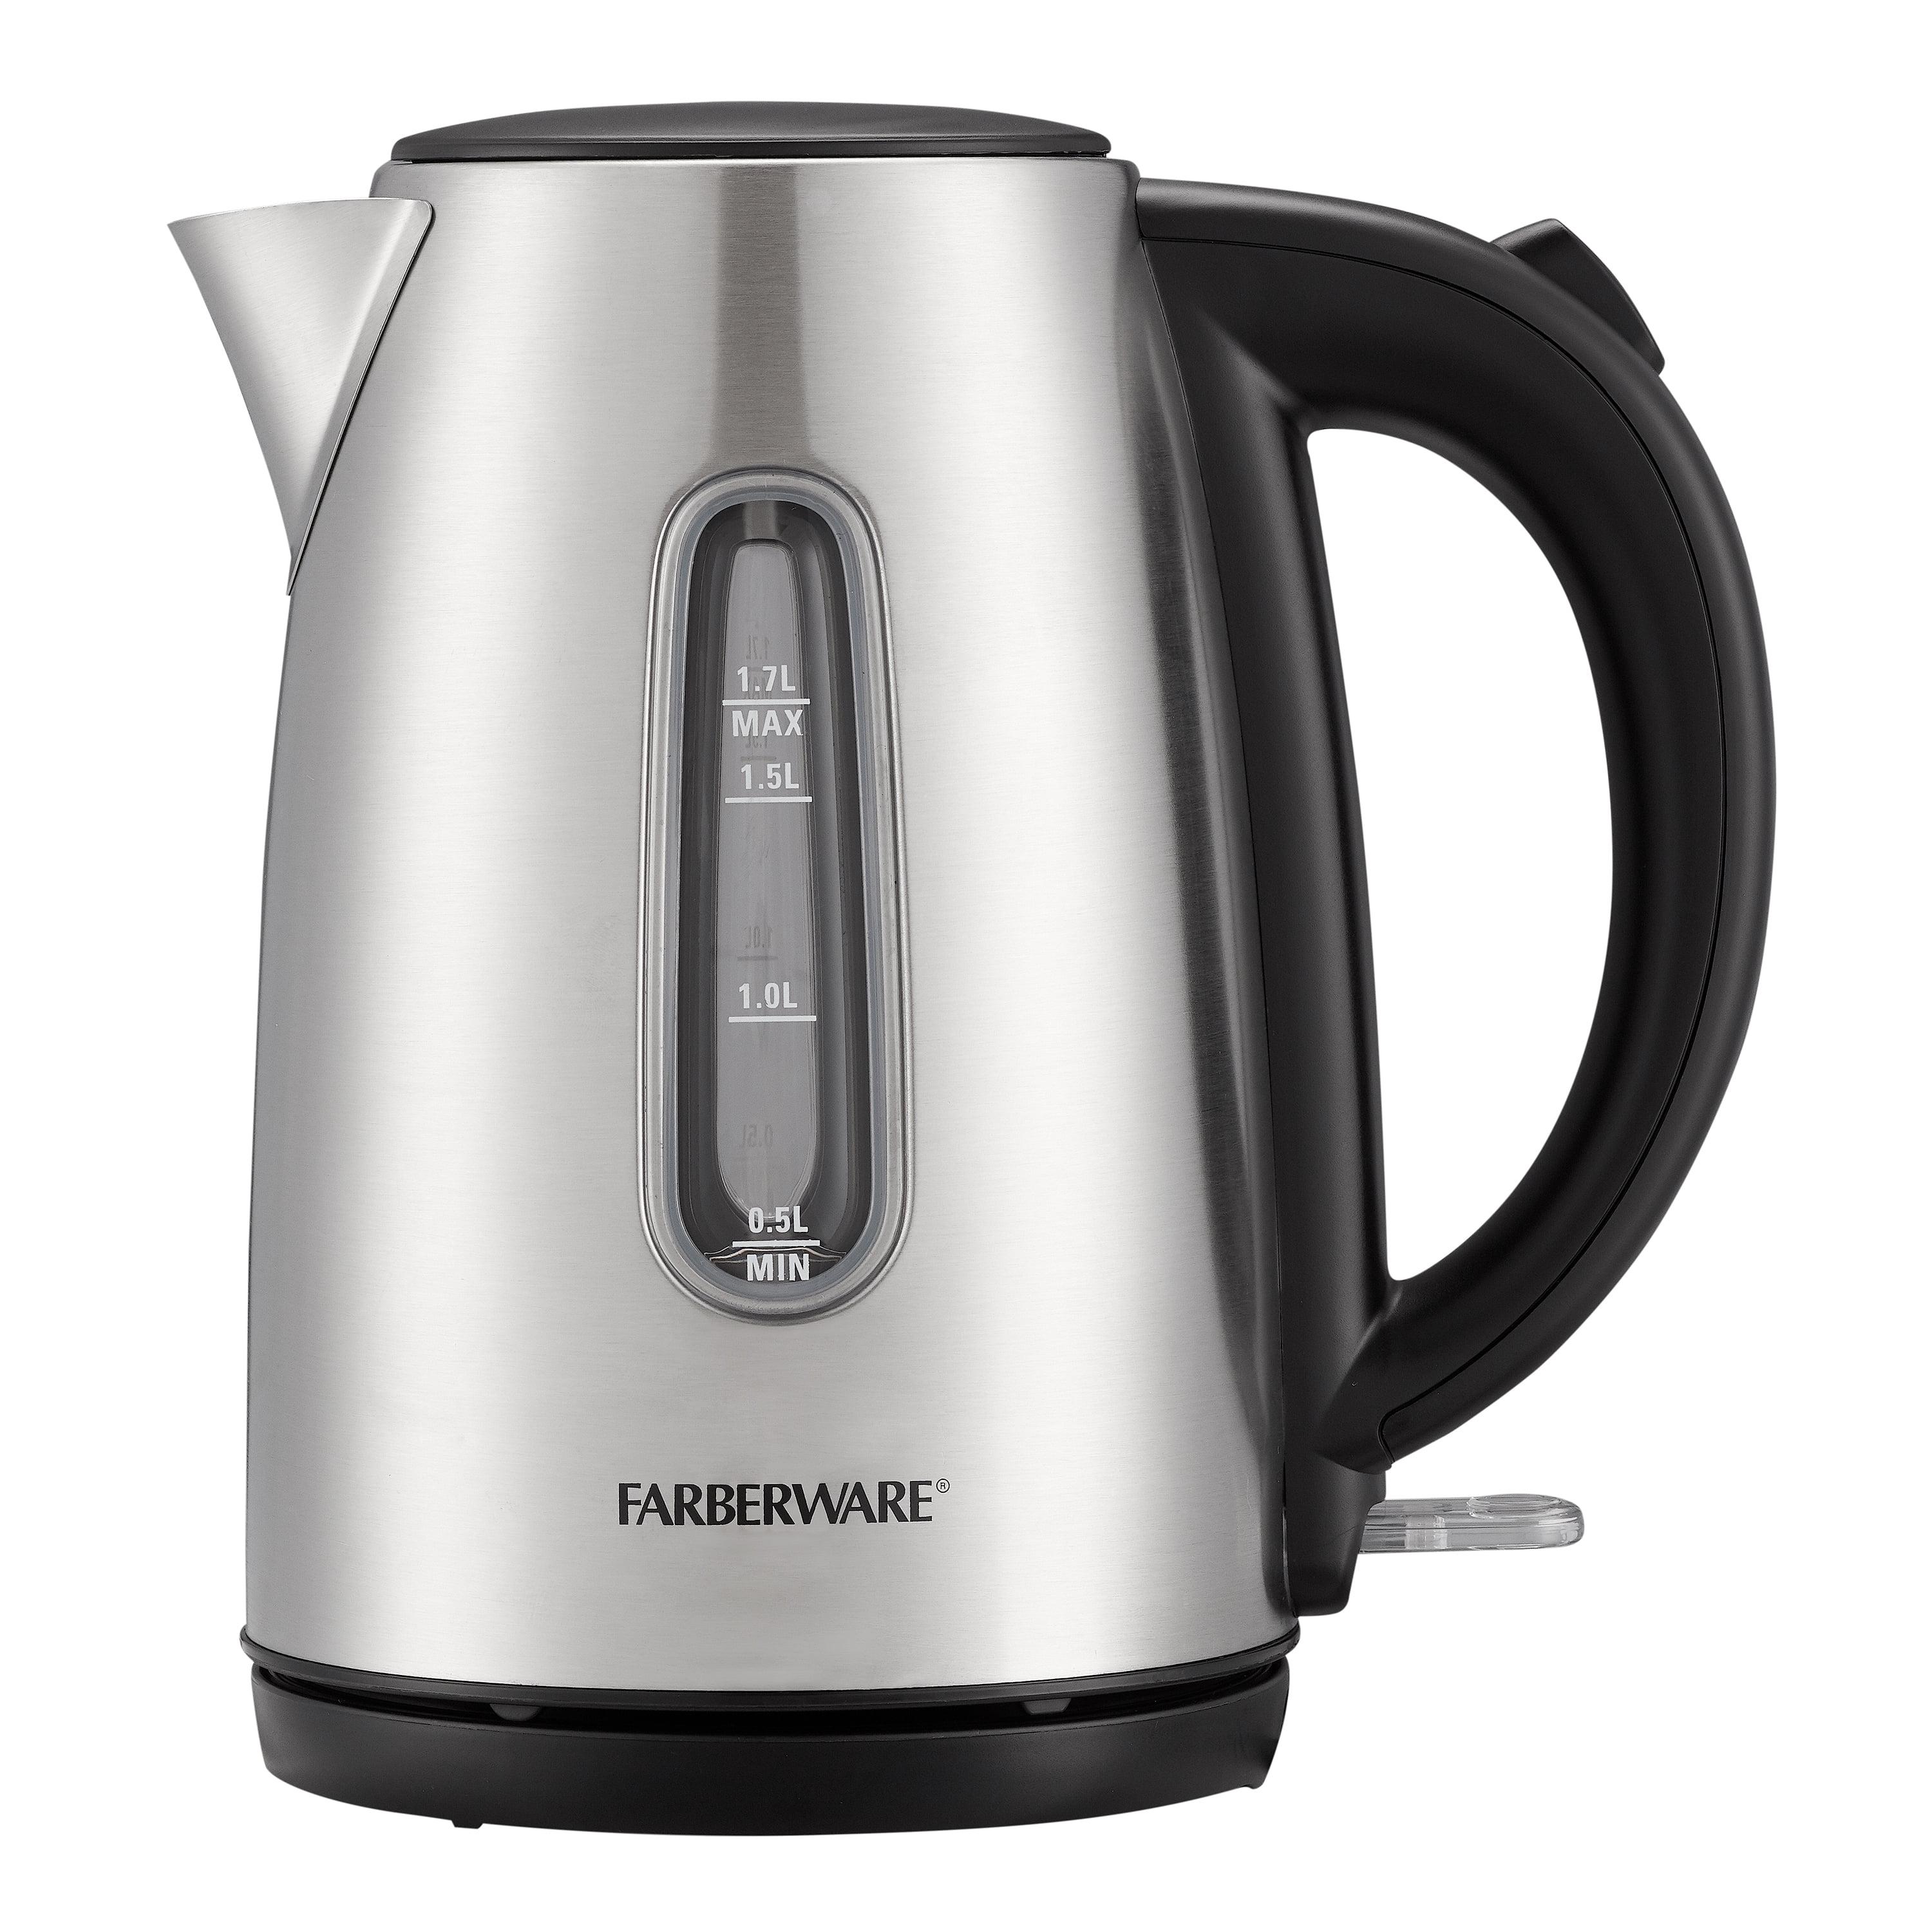 Hamilton Beach 40880 Stainless Steel Electric Kettle 1.7-Liter Silver FREE 2-DAY